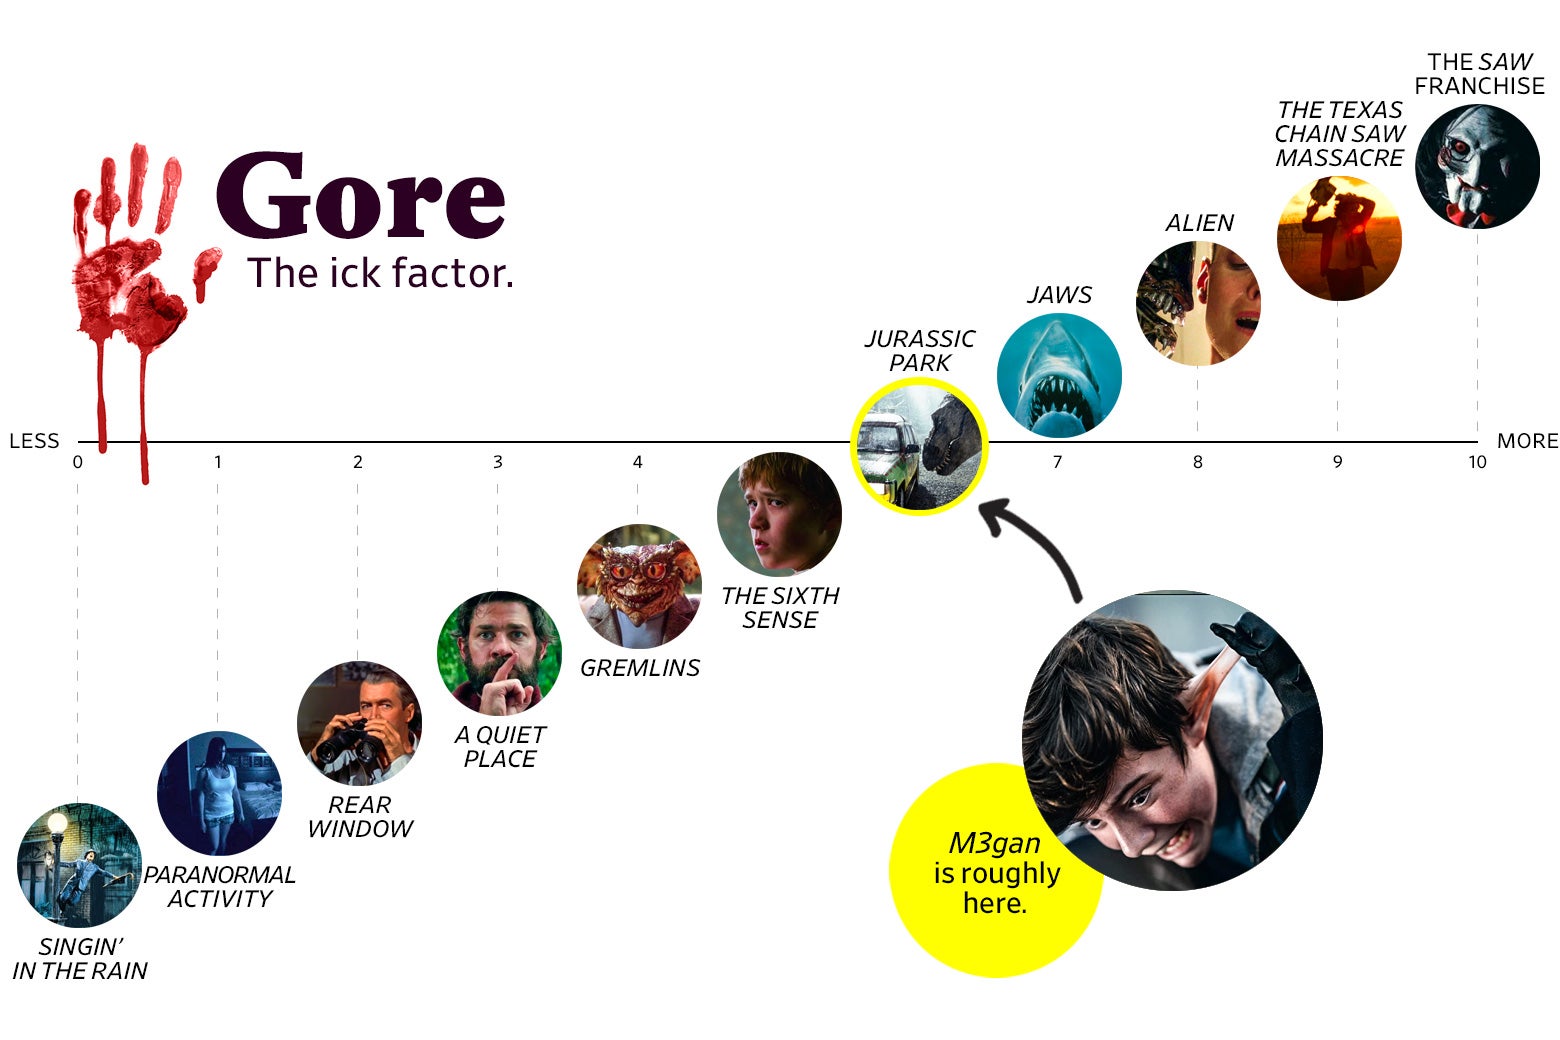 A chart titled “Gore: the Ick Factor” shows that M3gan ranks a 6 in goriness, roughly the same as Jurassic Park. The scale ranges from Singin’ in the Rain (0) to the Saw franchise (10). 